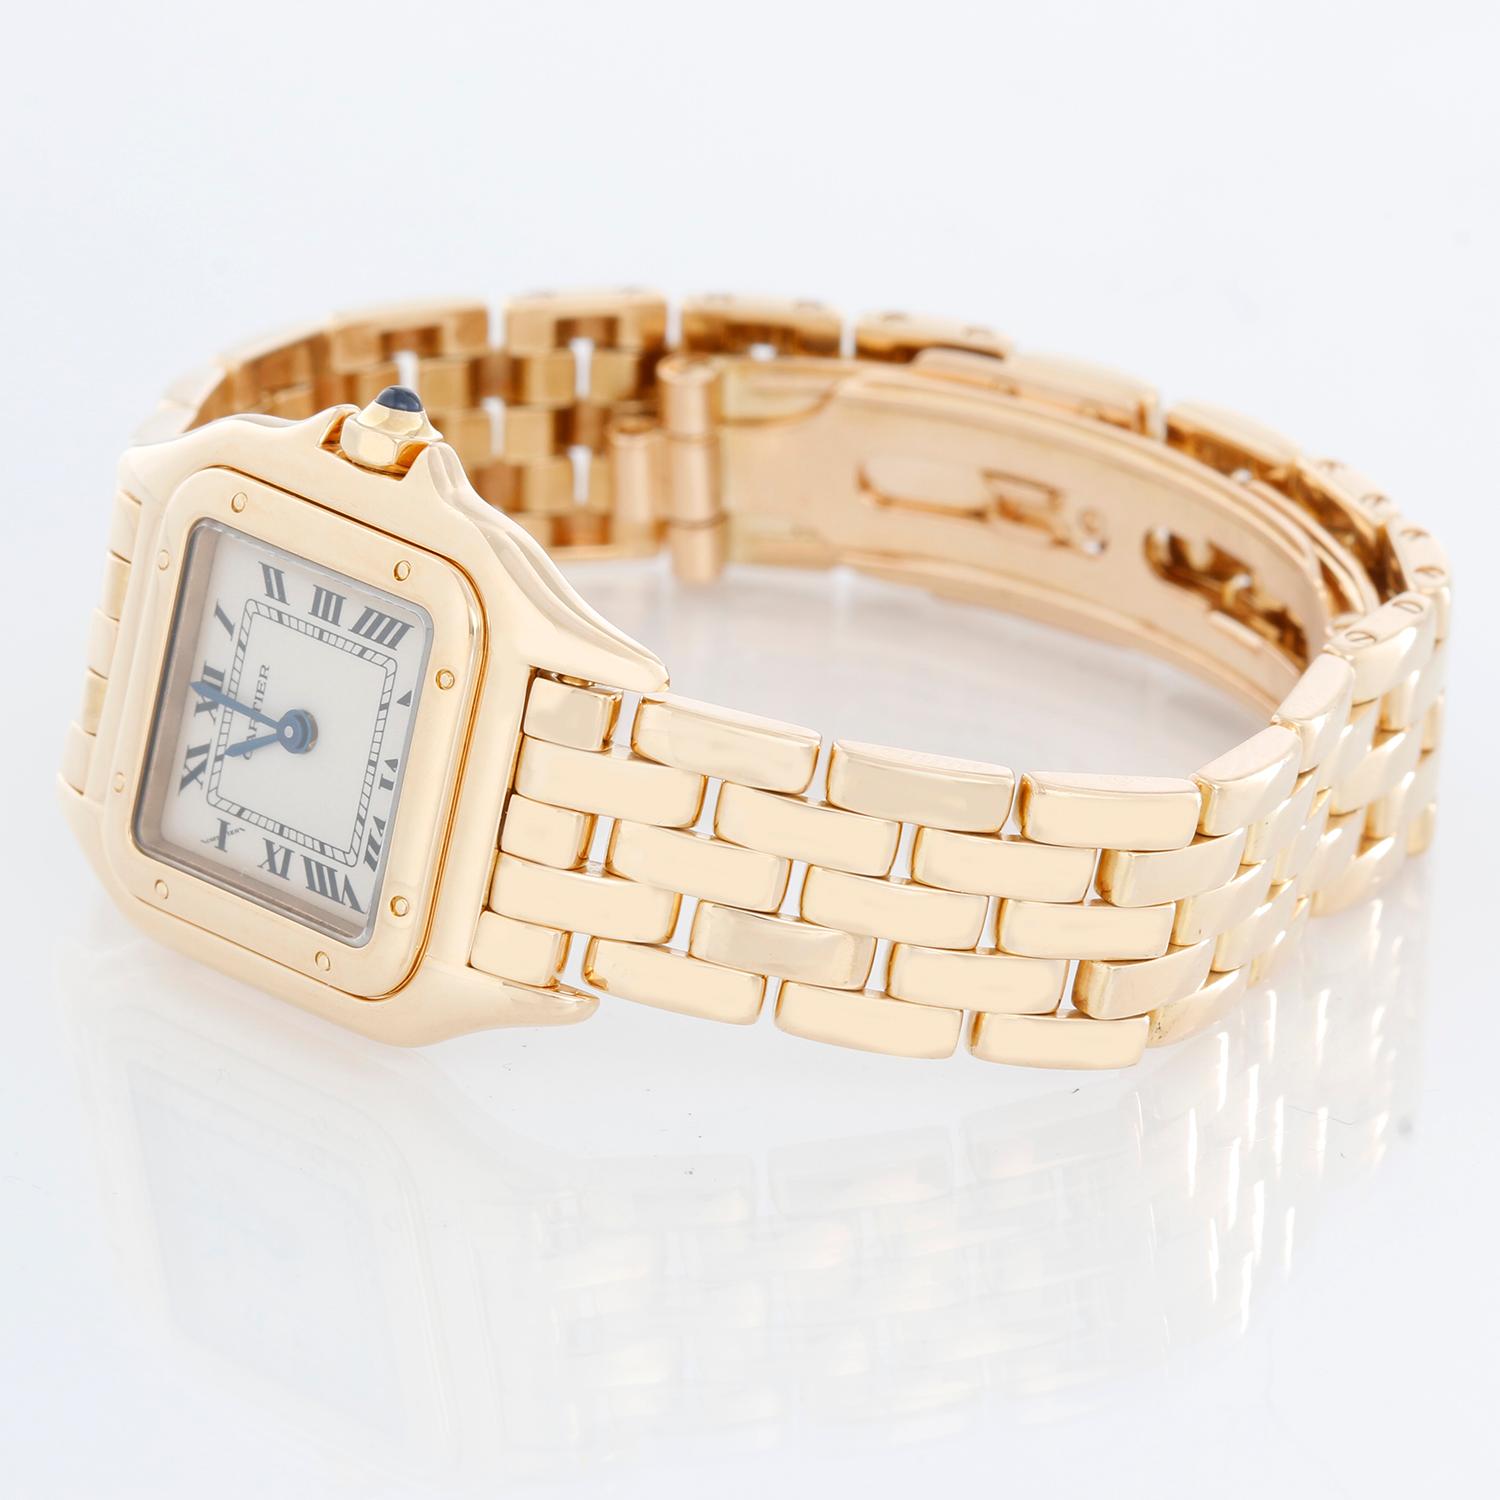 Cartier Panther Ladies 18k Yellow Gold Watch - Quartz. 18k yellow gold case (22mm x 30mm ). Ivory colored dial with black Roman numerals. 18k yellow gold Panther bracelet. Pre-owned with custom box . All watches measure to fit the average size wrist